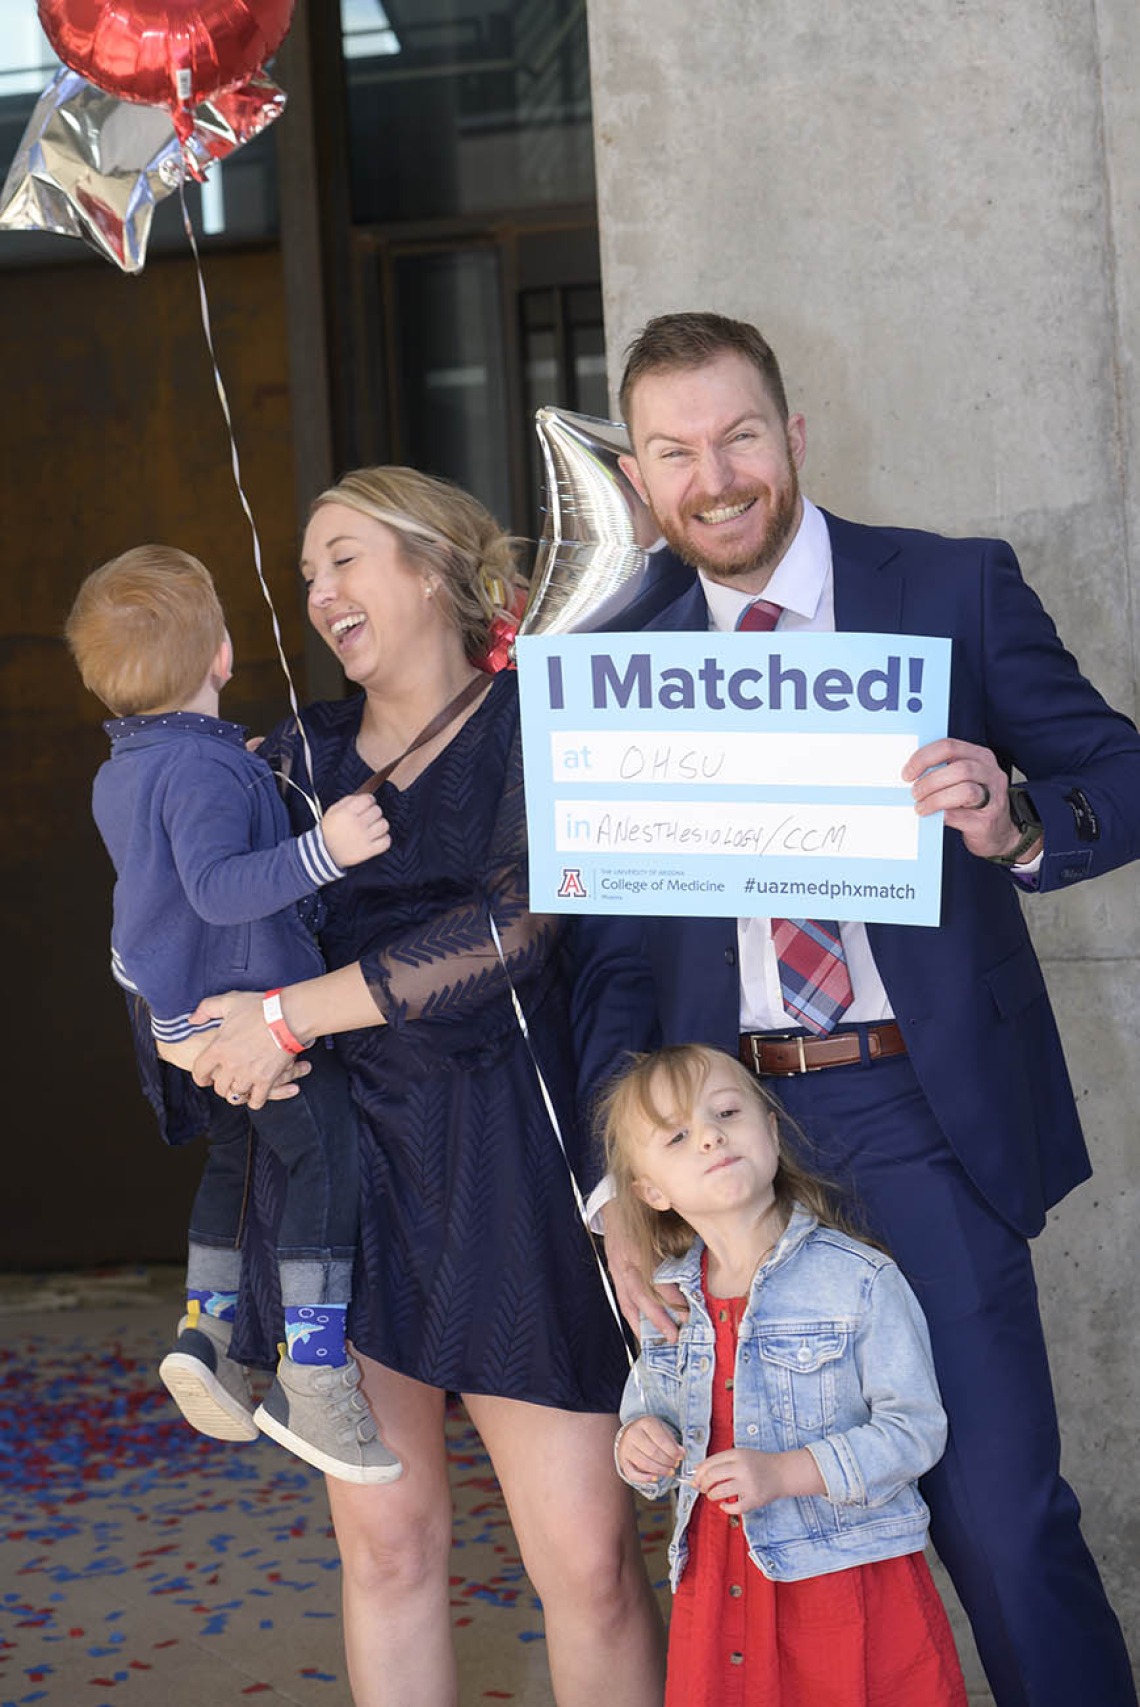 A family stands together as the dad holds an "I Matched" sign and his wife looks at the boy she is holding and smiles. Young girl standing in front of them.